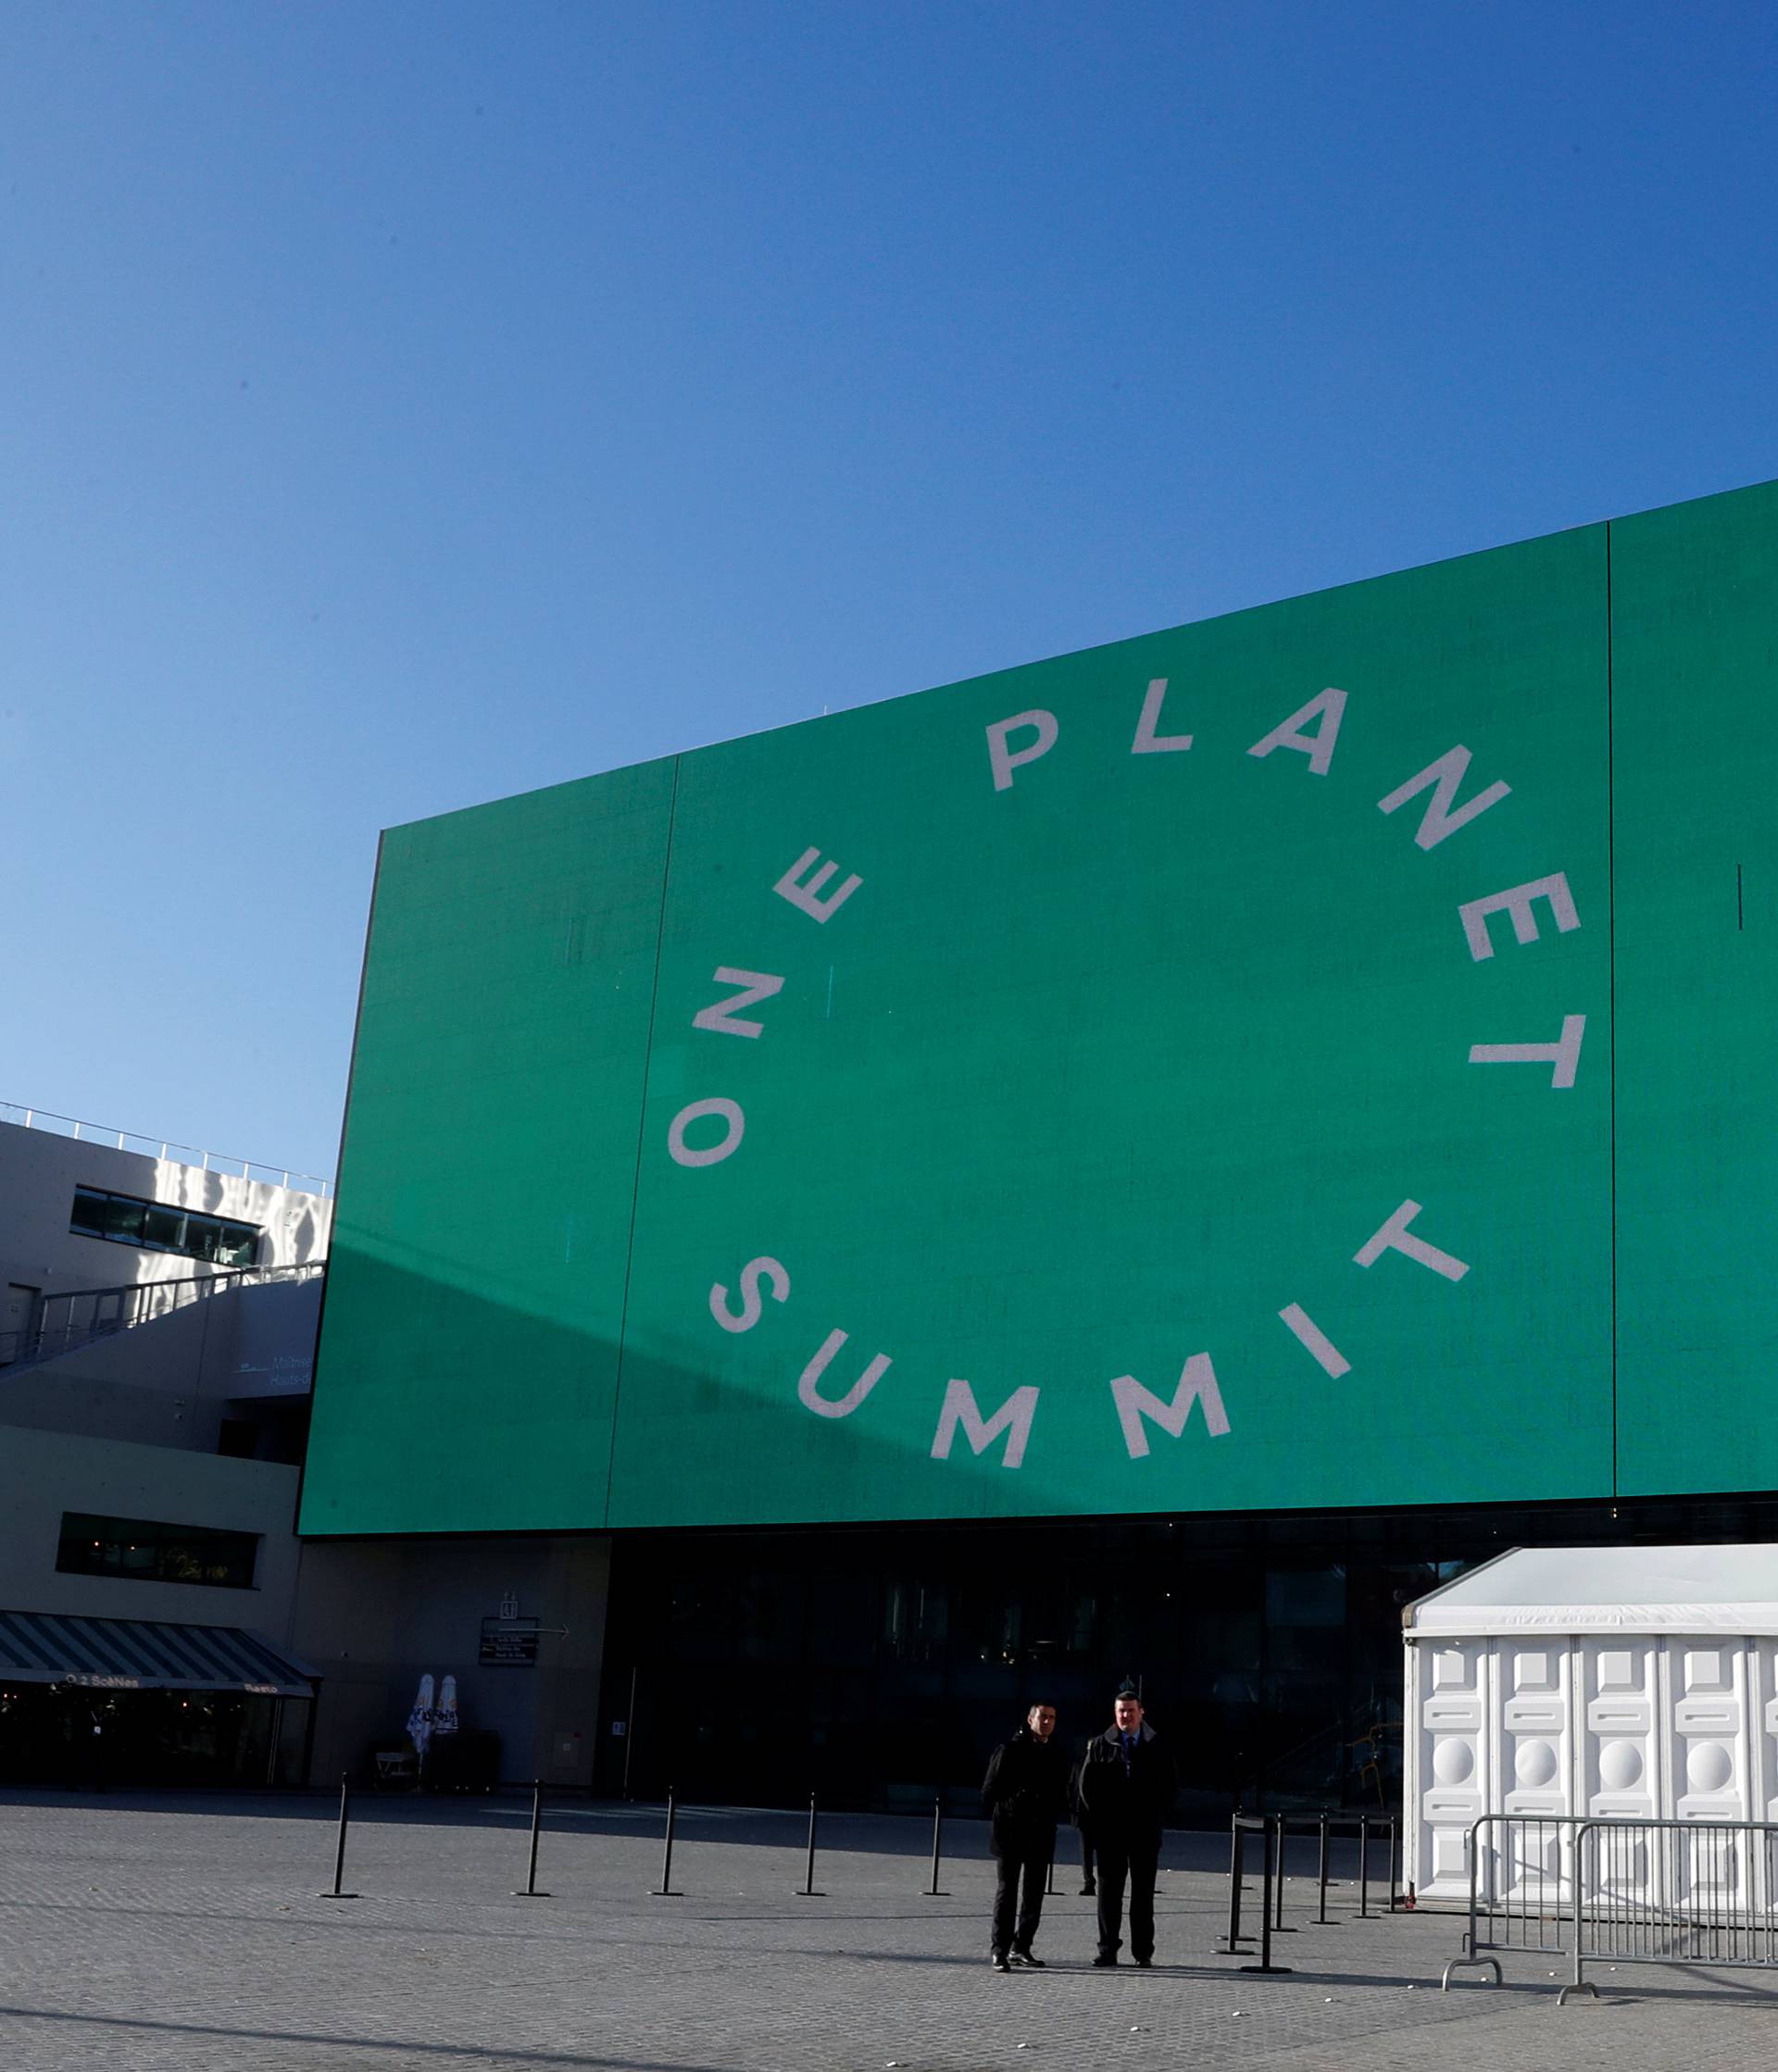 The logo of the One Planet Summit is seen at the main entrance of the Seine Musicale center in Boulogne-Billancourt, near Paris